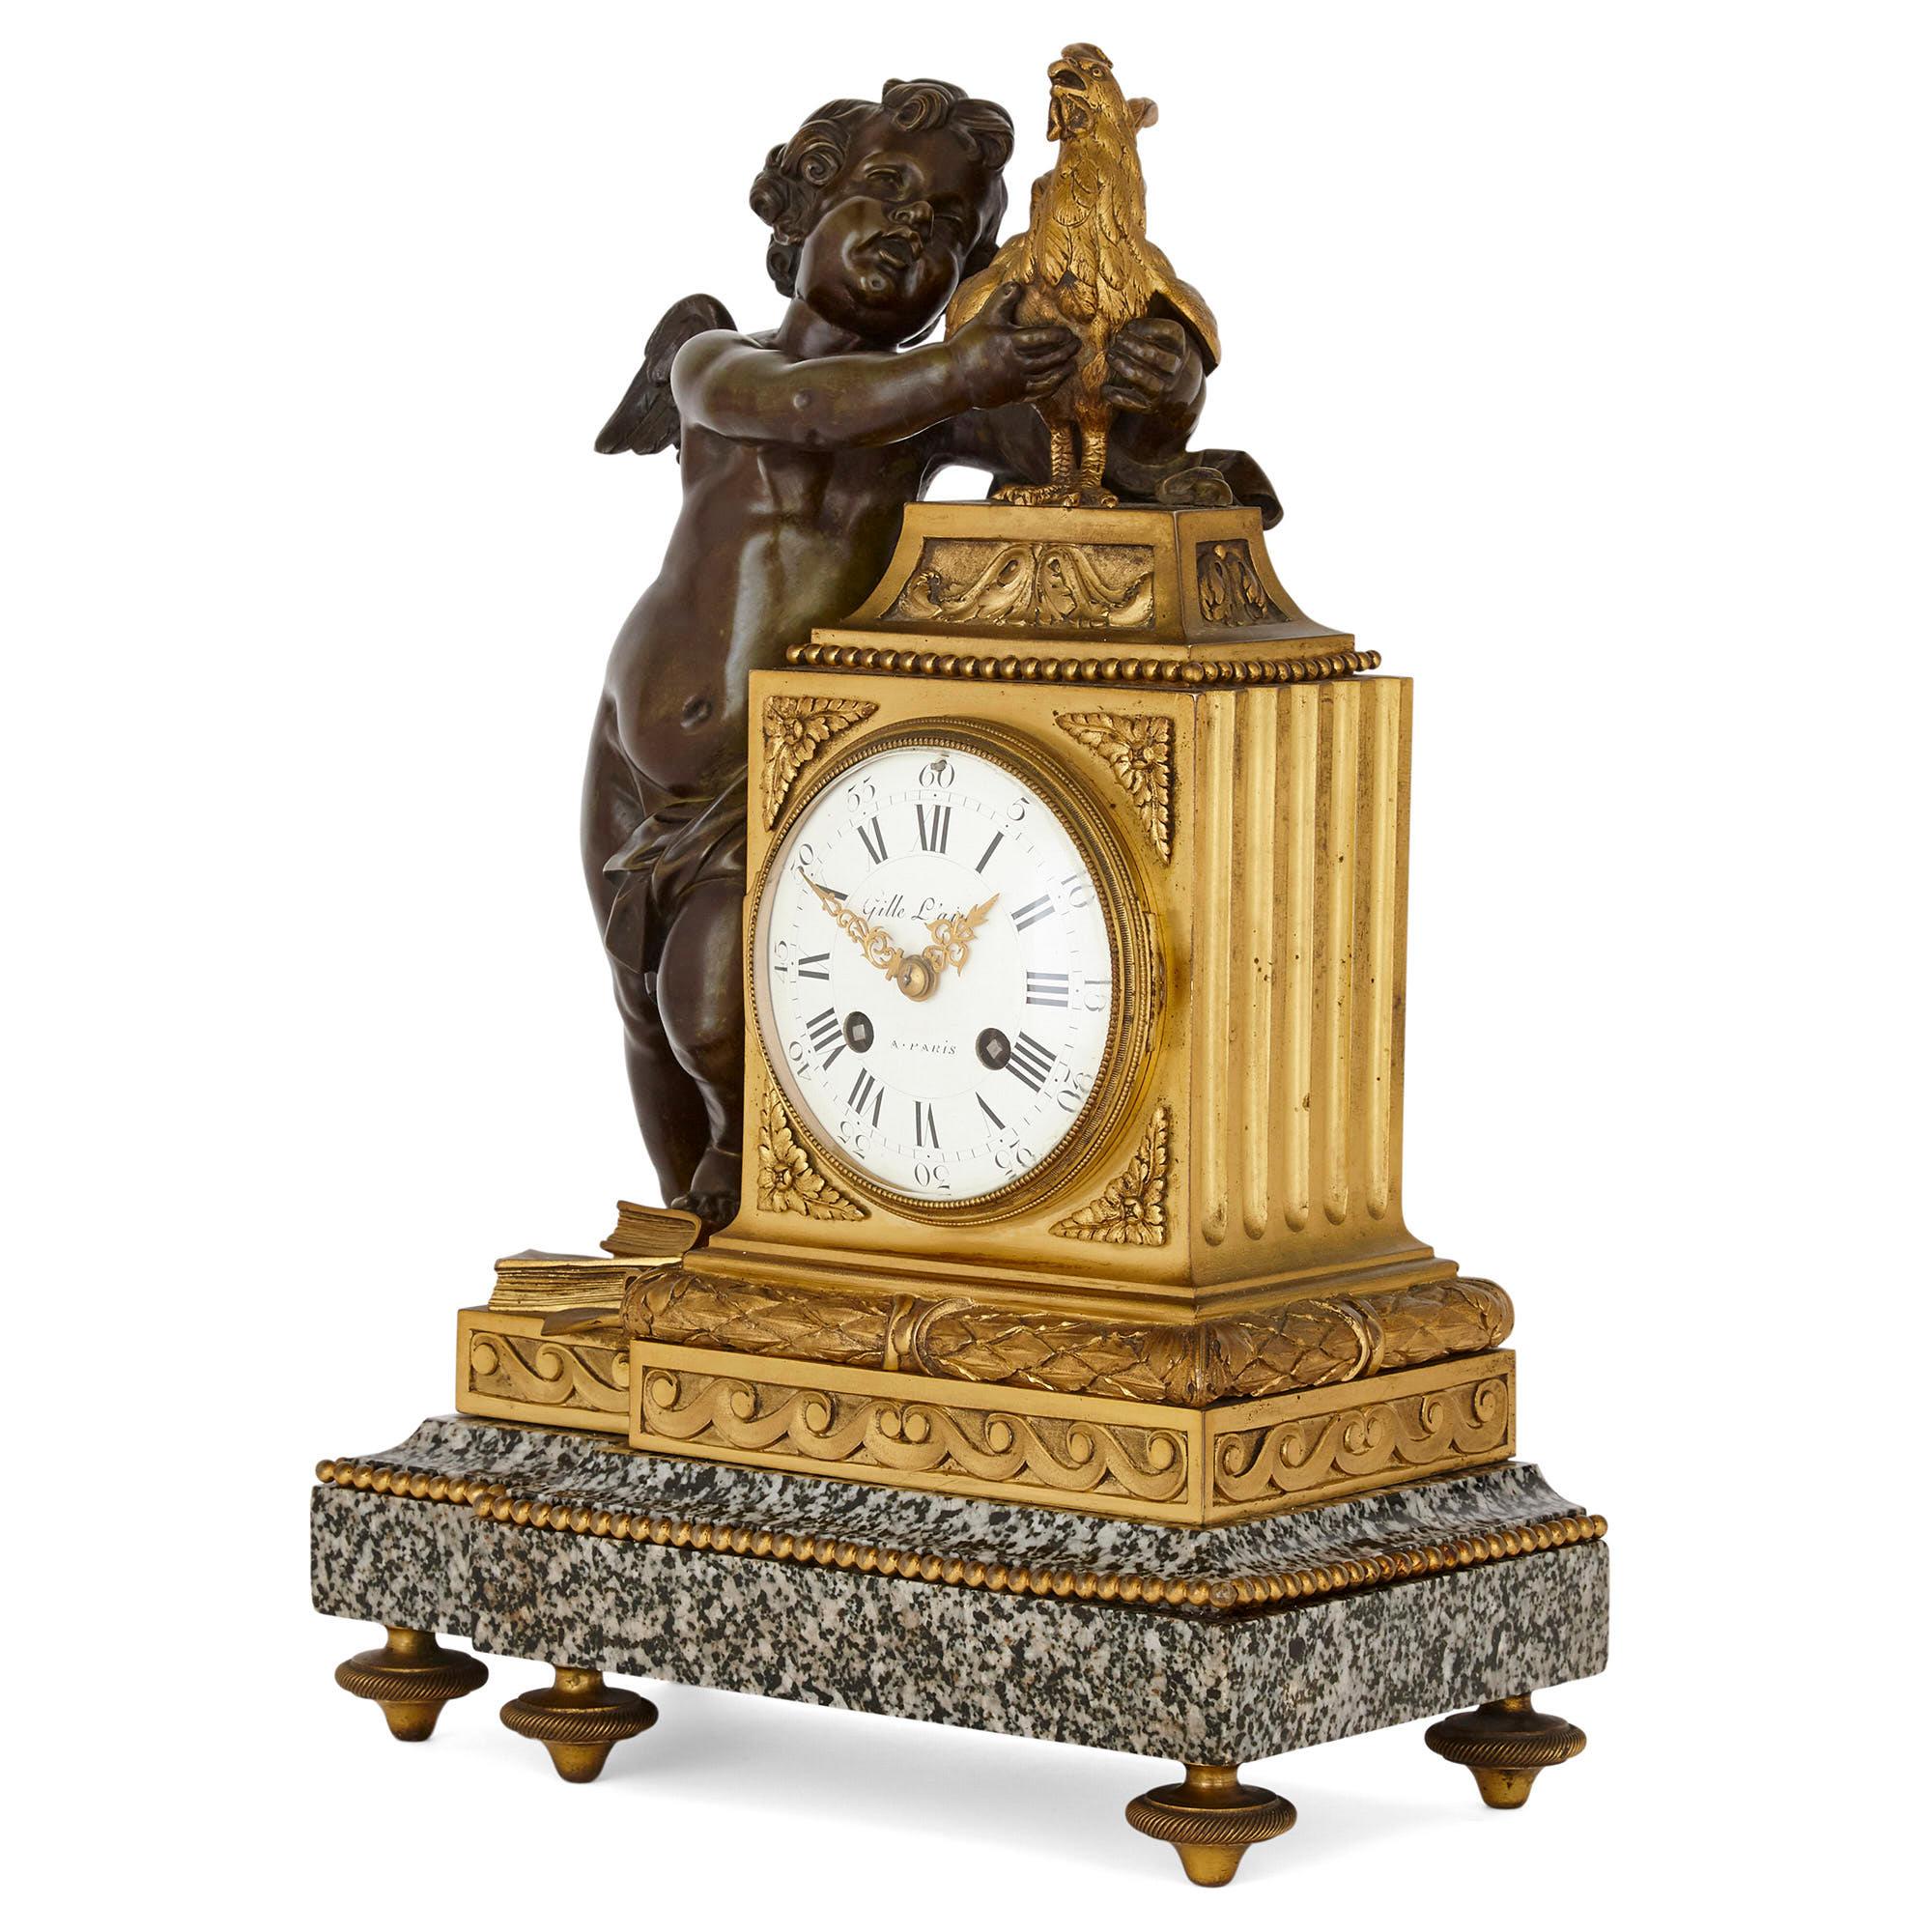 This neoclassical style French mantel clock is crafted from patinated and gilt bronze in addition to flecked black and grey marble. The clock body is formed from a lopsidedly mounted gilt bronze clock drum, which is rectangular in shape. The gilt